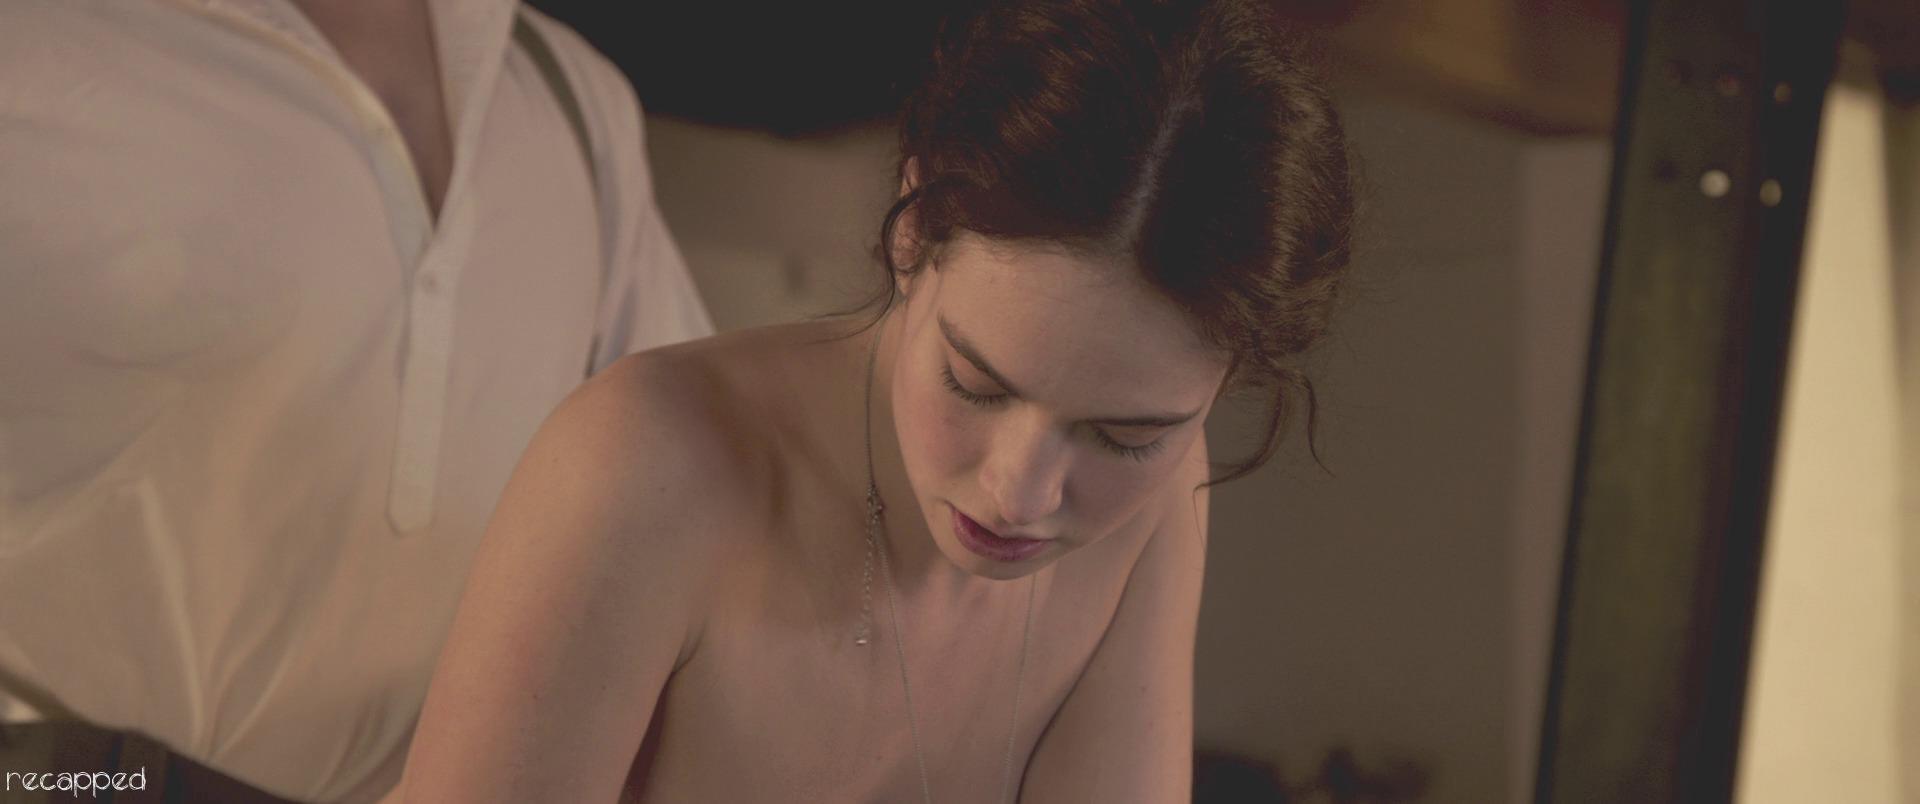 James nudity lily The Exception